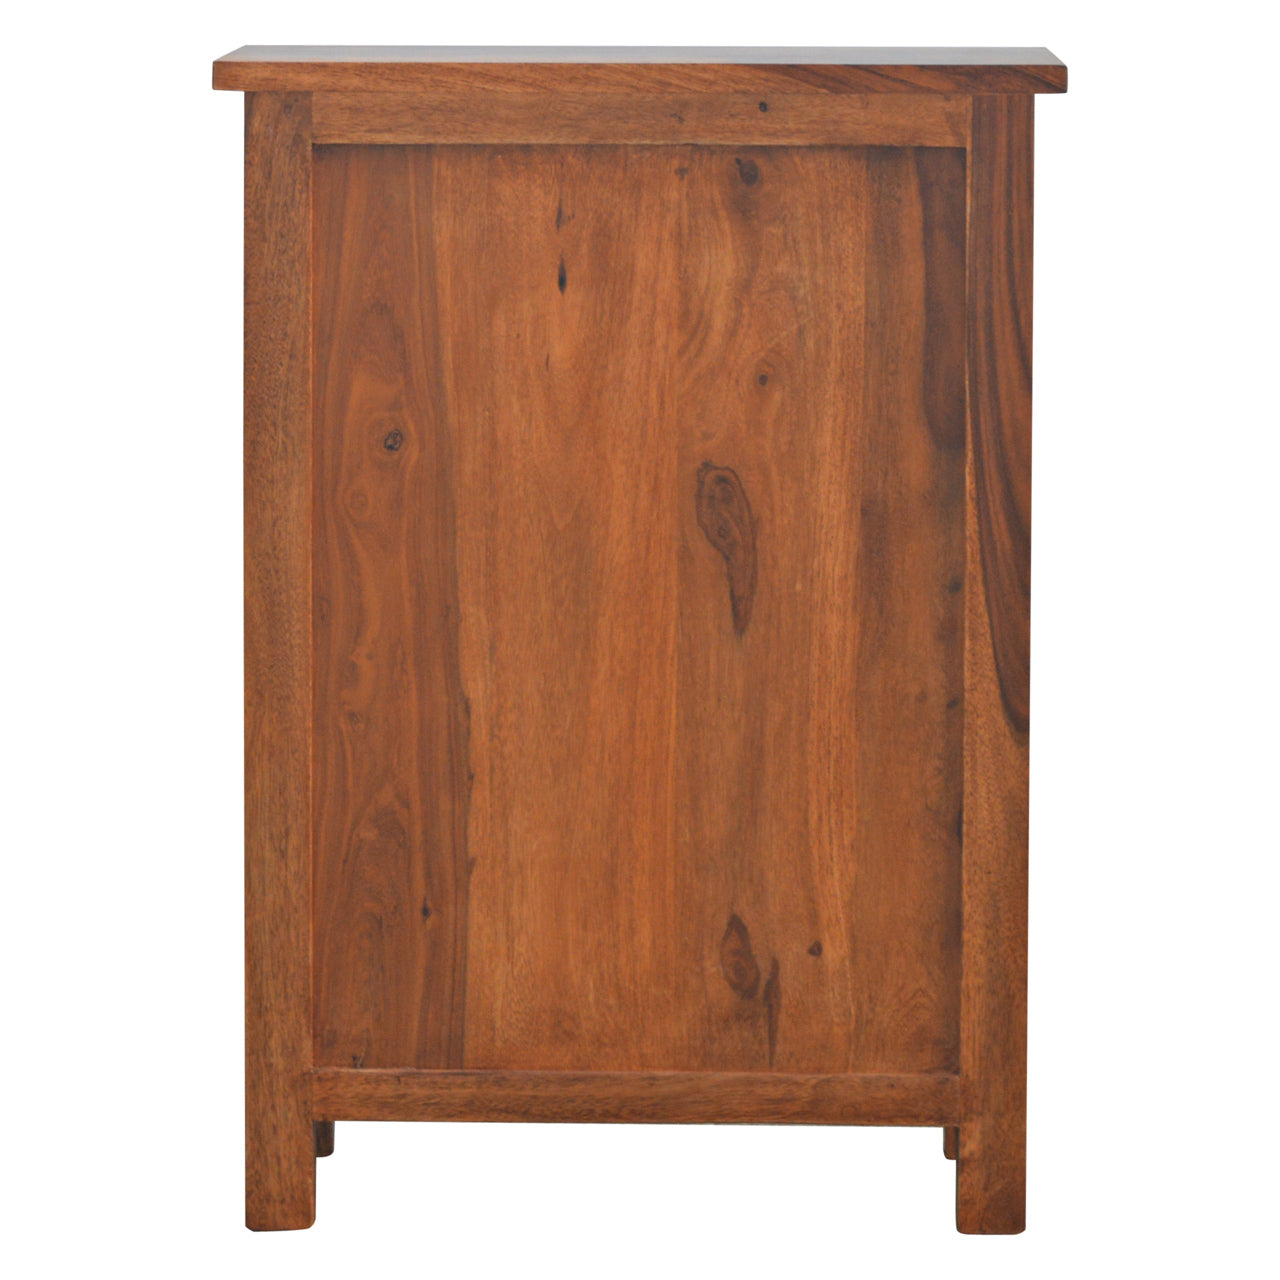 Sheesham Wood Cabinet with 4 Drawers and 1 Door